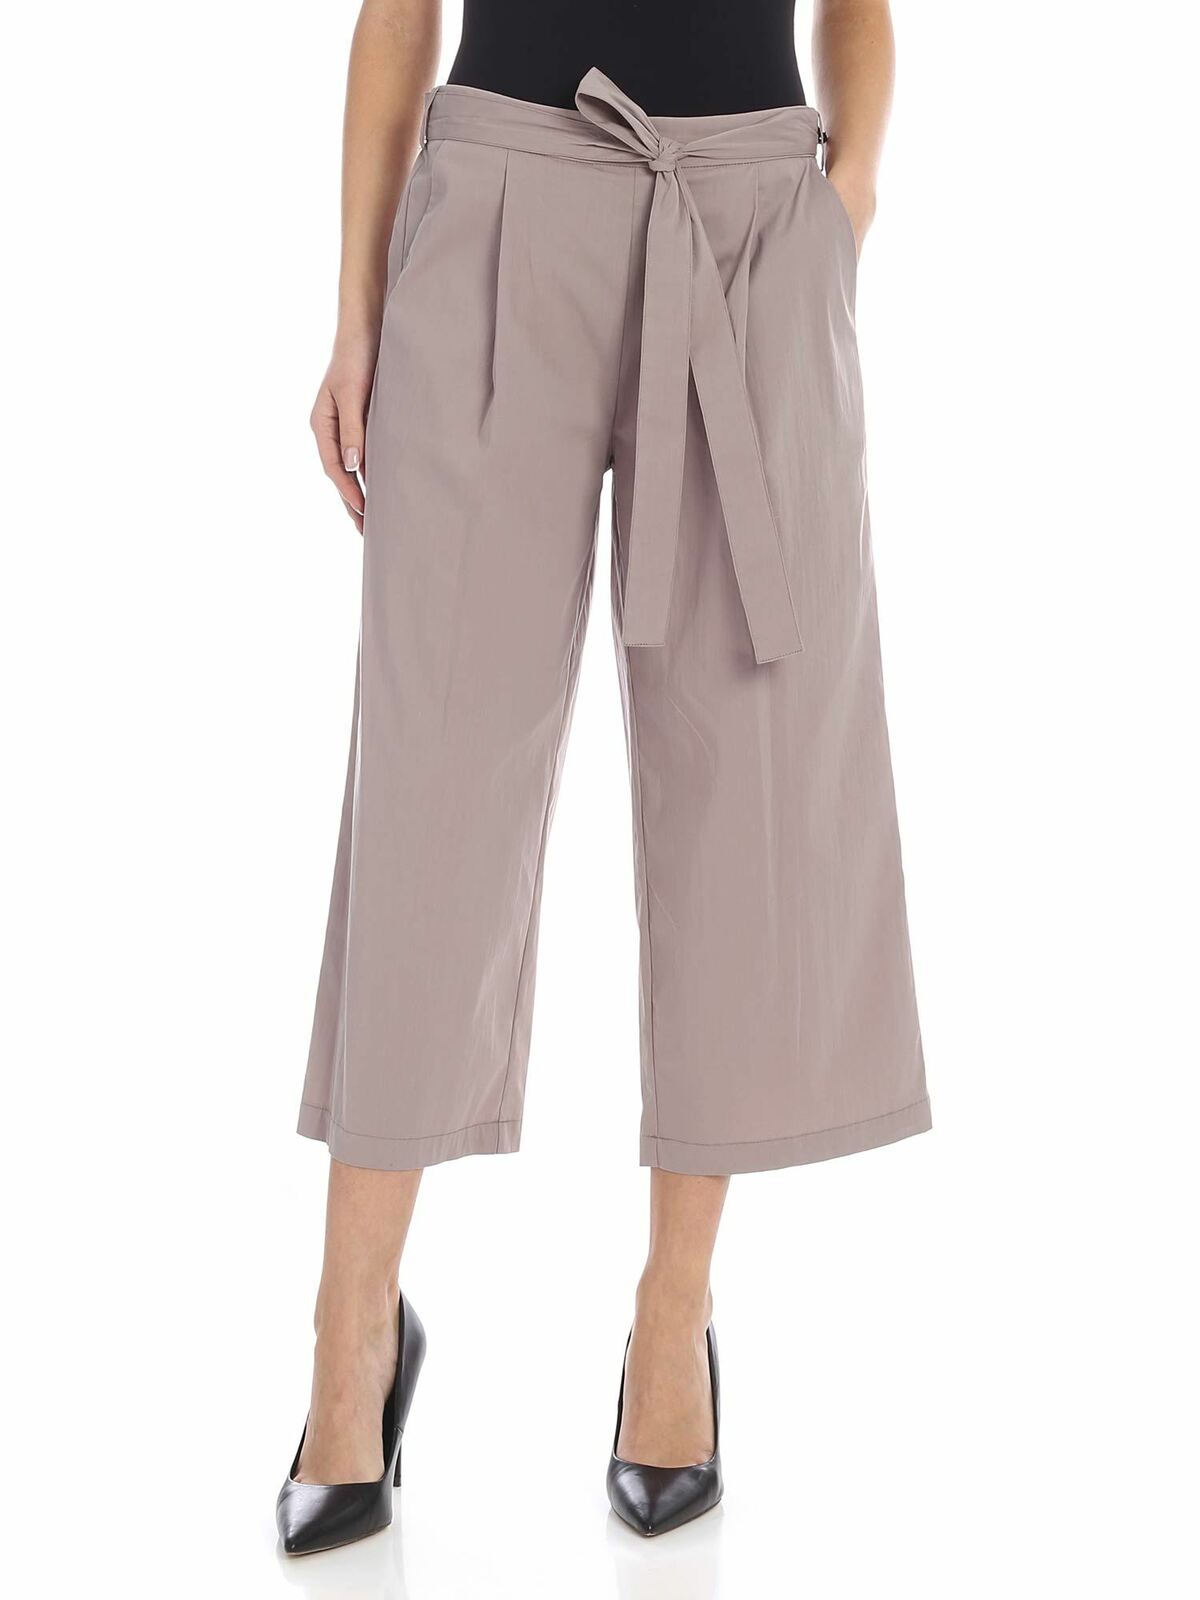 Dkny Crop Pants In Dove Gray With Bow At The Waist In Brown